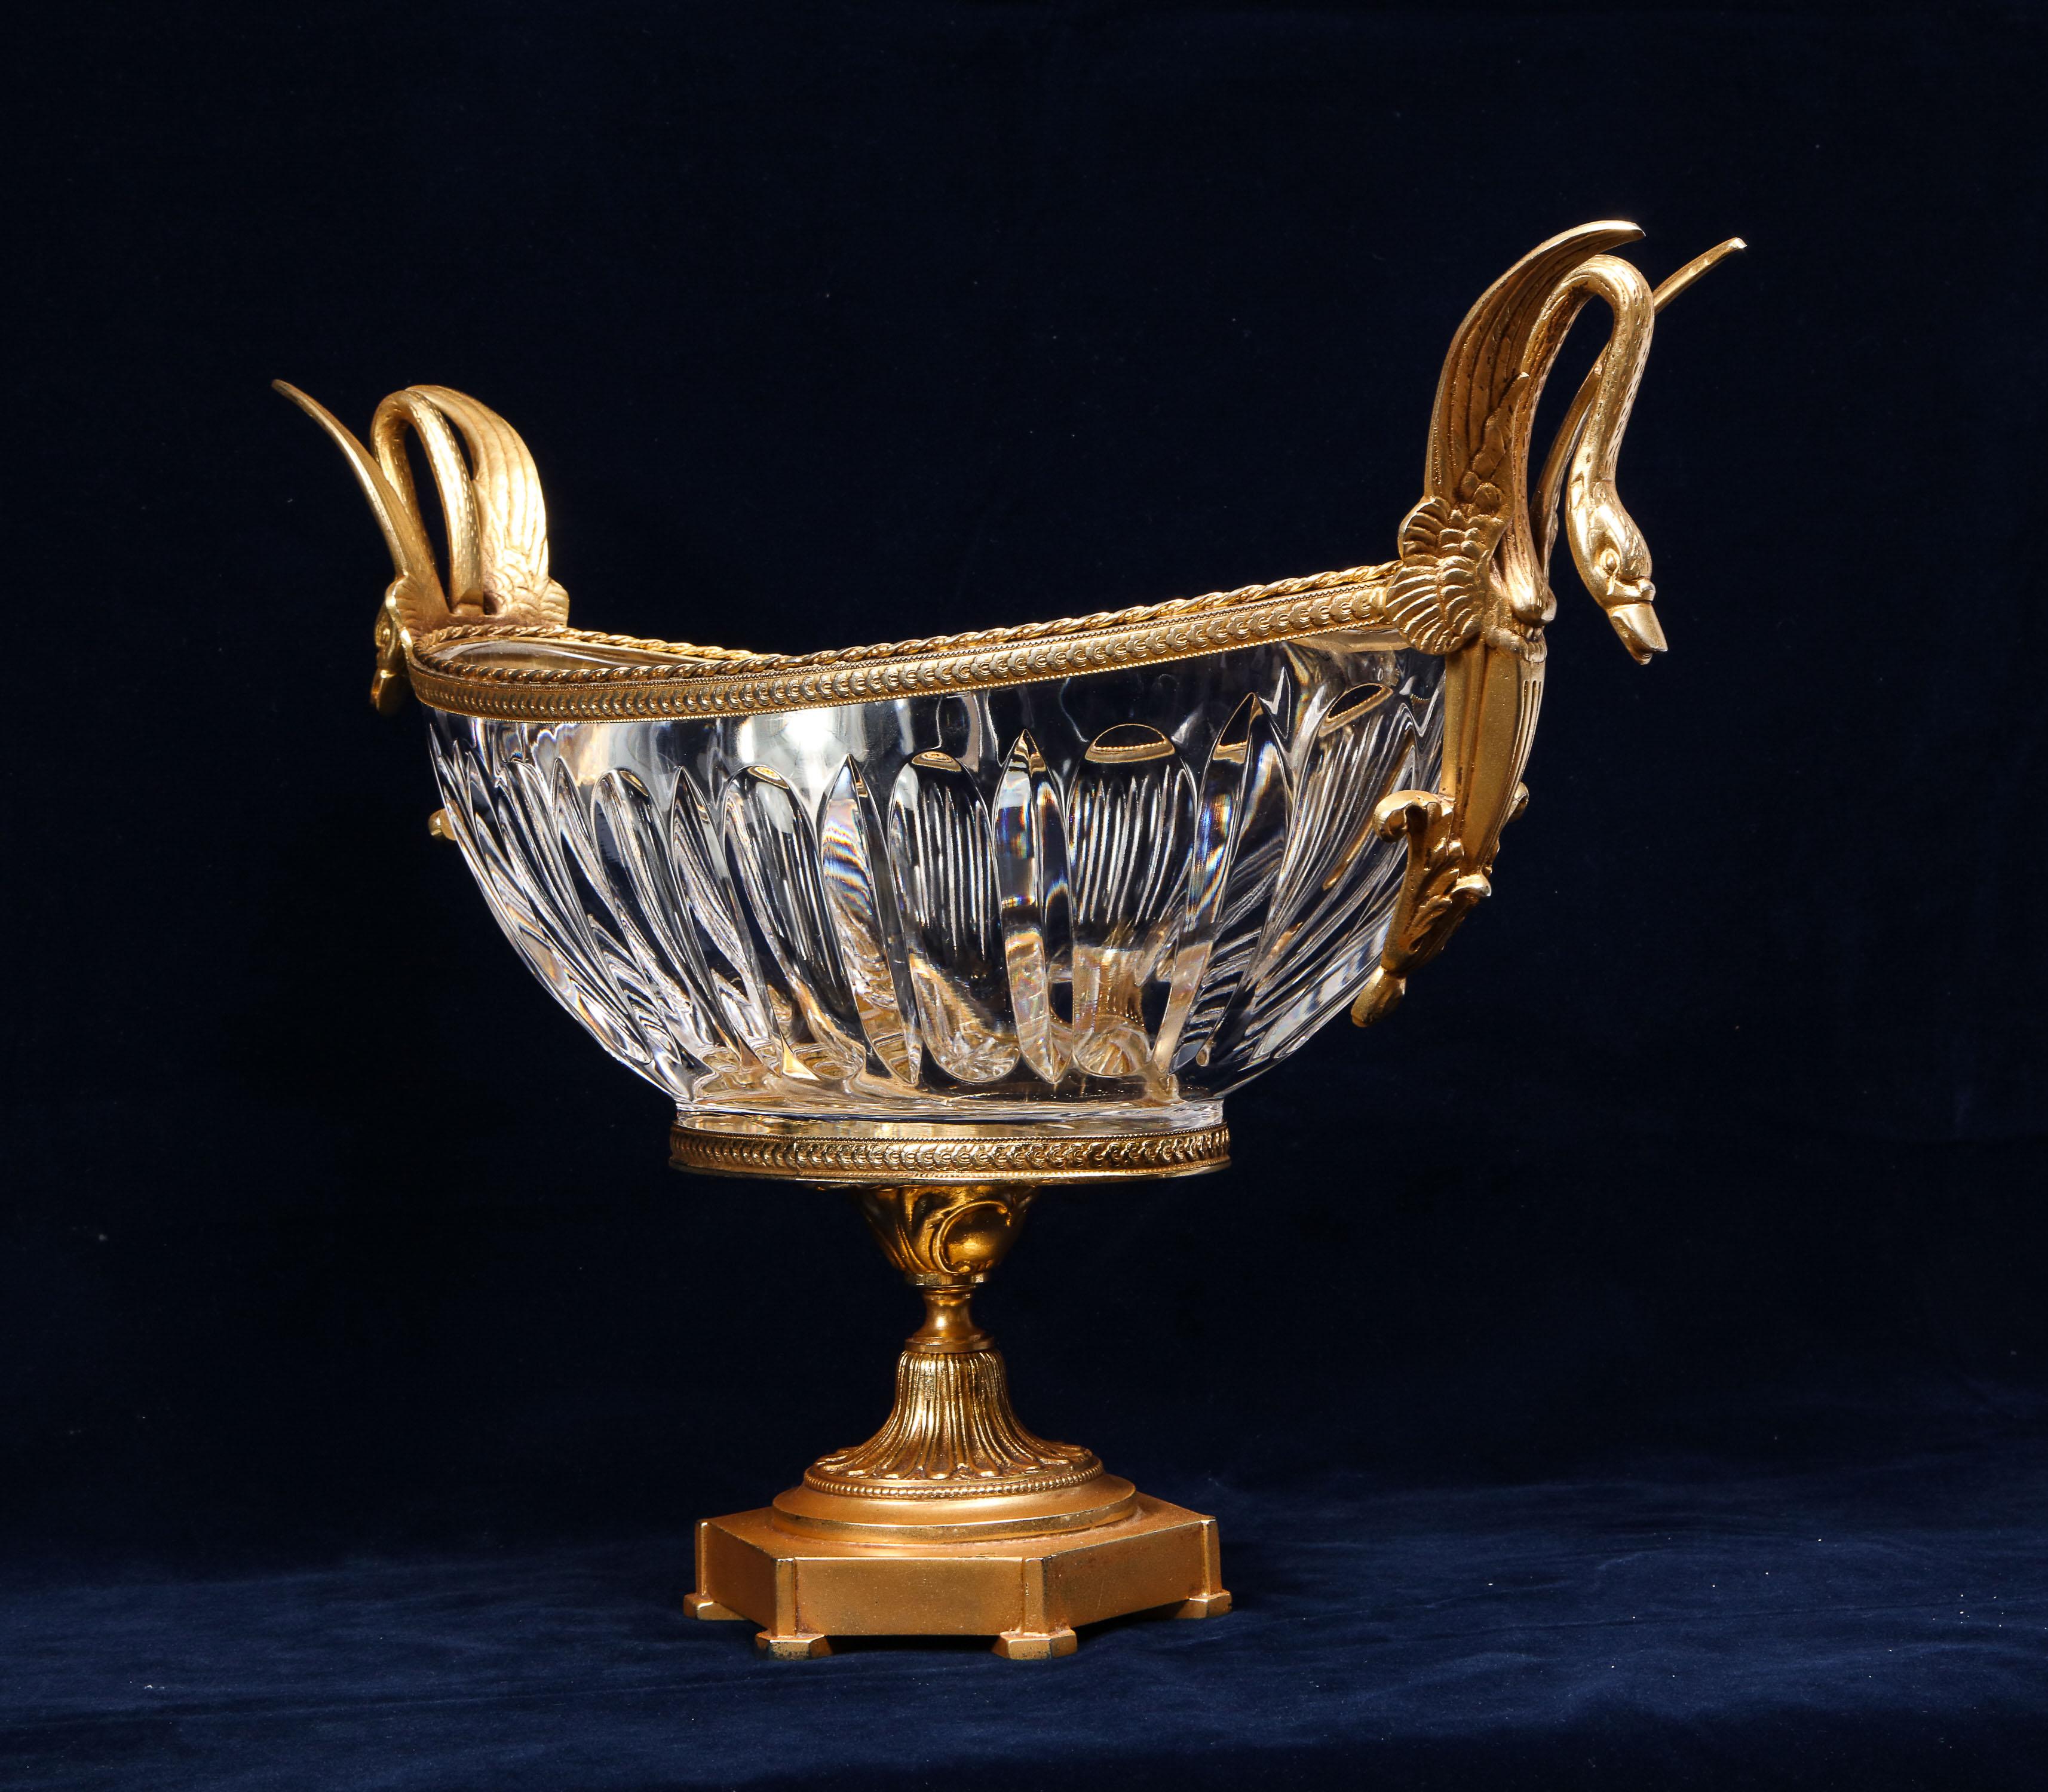 A beautiful Louis XVI style 19th century gilt bronze mounted crystal centerpiece with gilt bronze swan handles, attributed to Baccarat. The crystal is beautifully hand-diamond cut with long vertical concave patterns running around the bowl. The